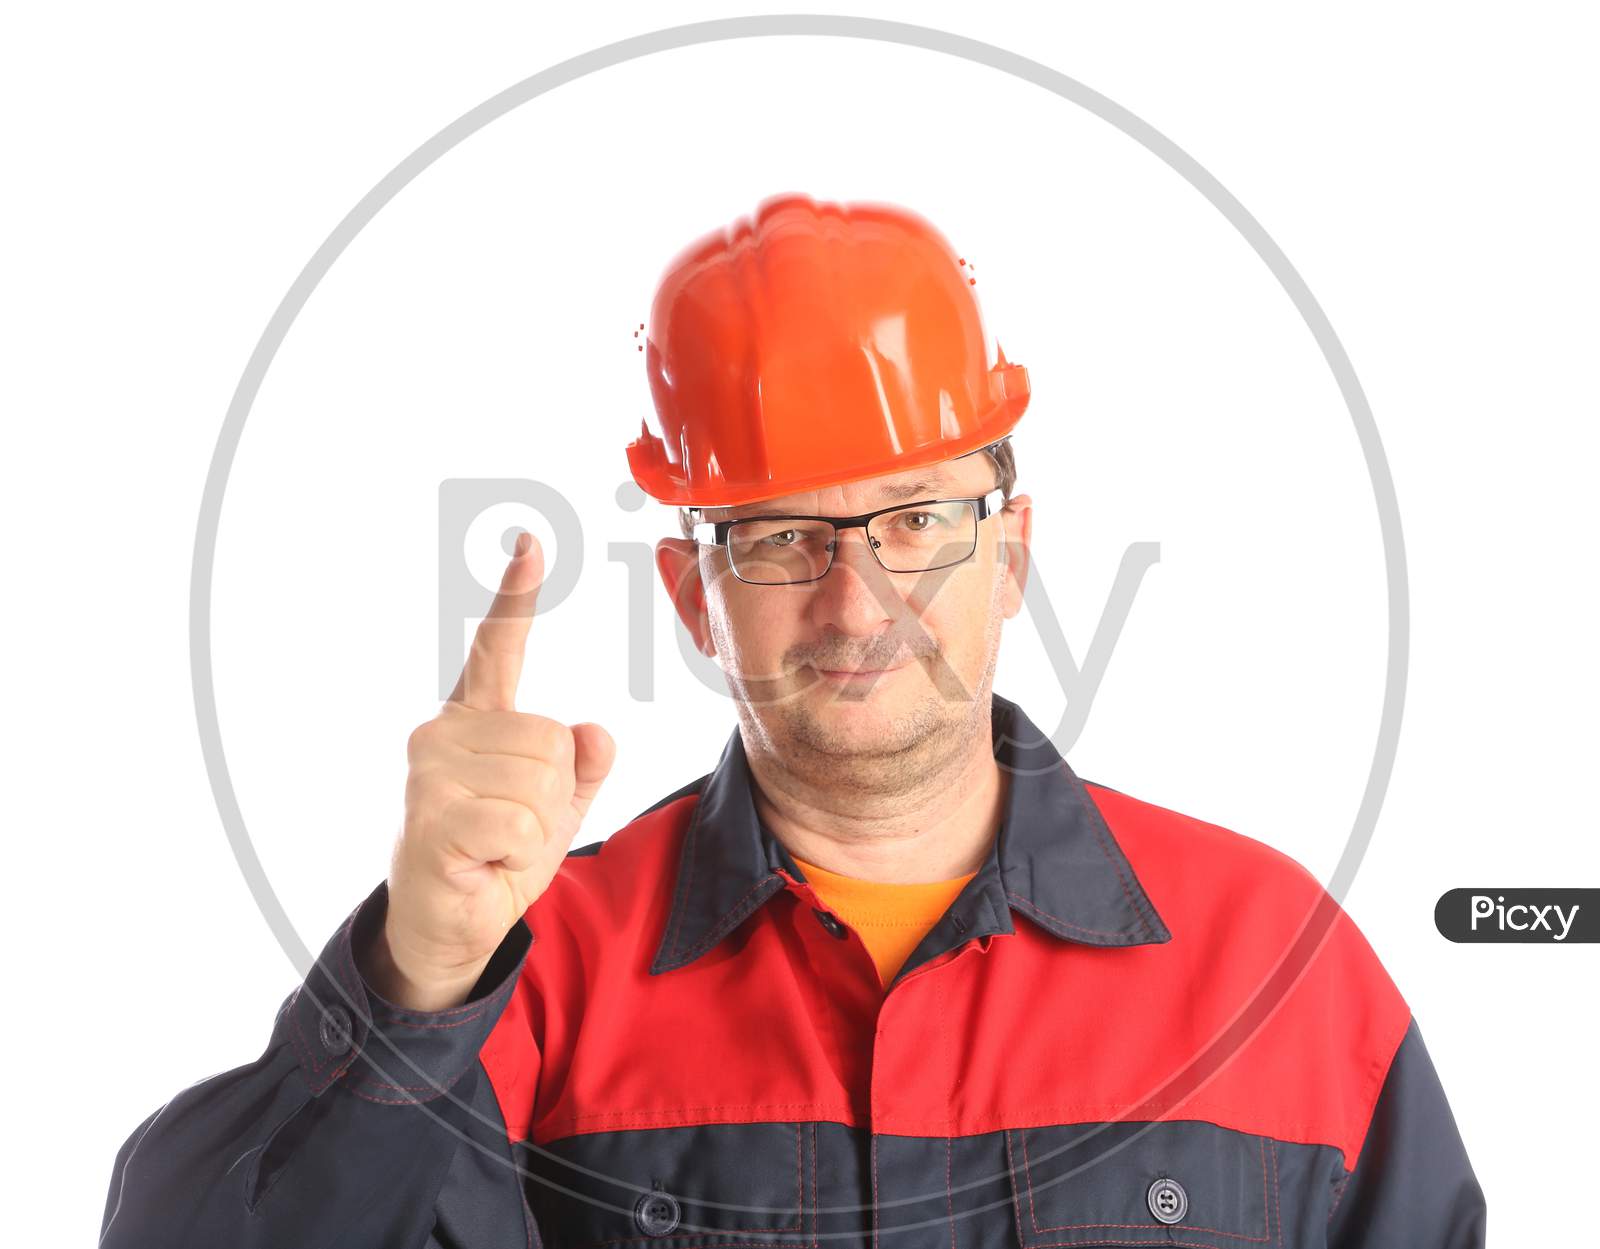 Worker Draws Attention. Isolated On A White Background.